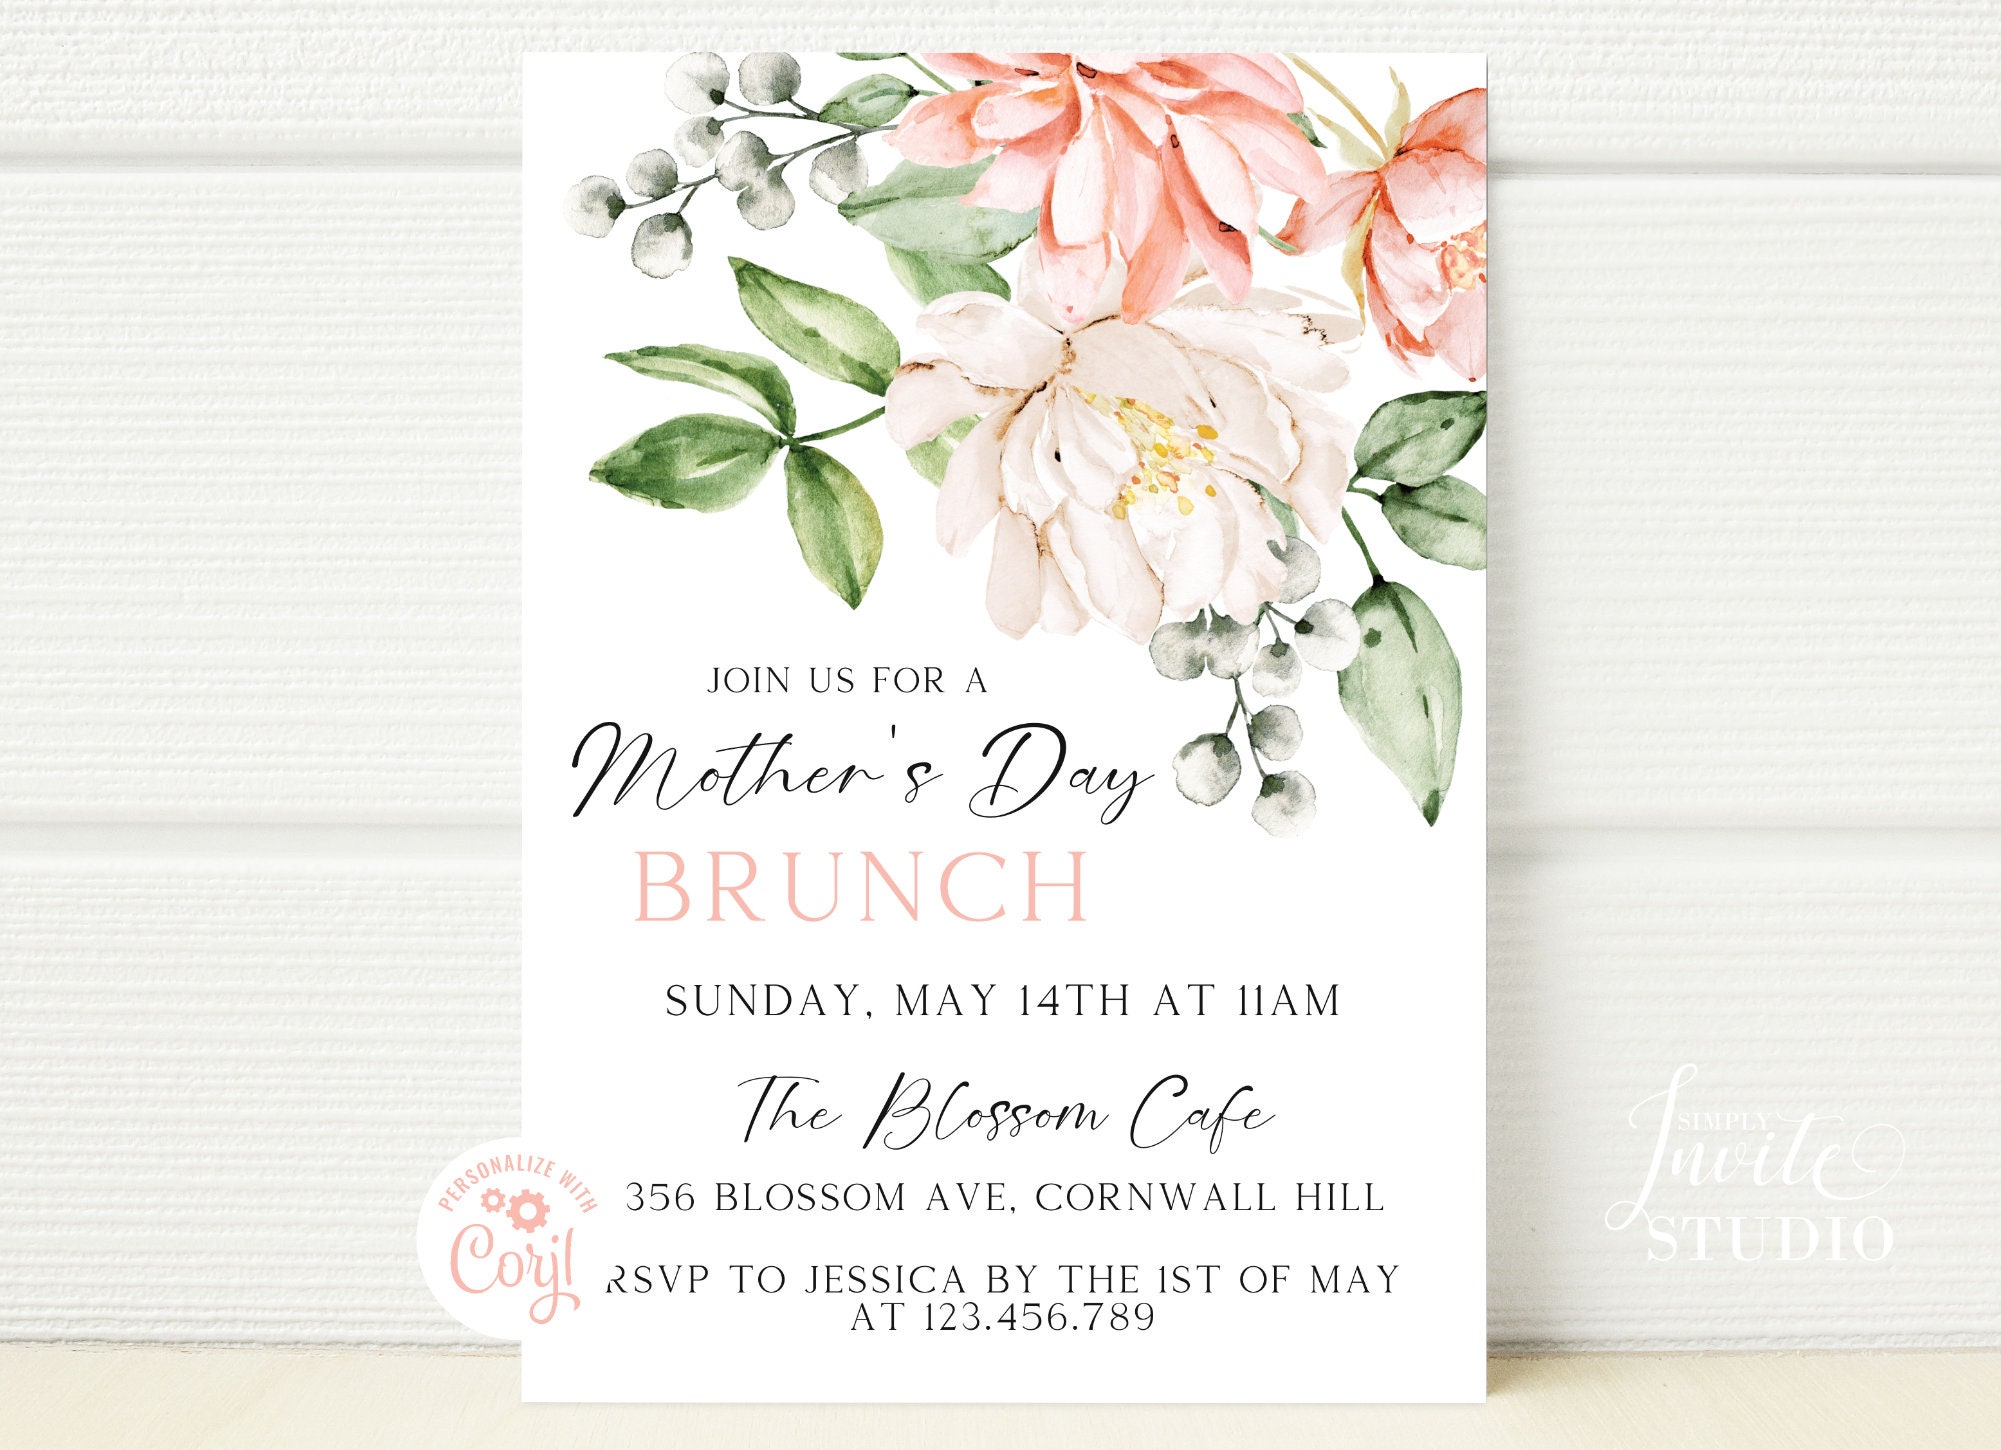 Mothers Day Brunch | kamimotostrings.com